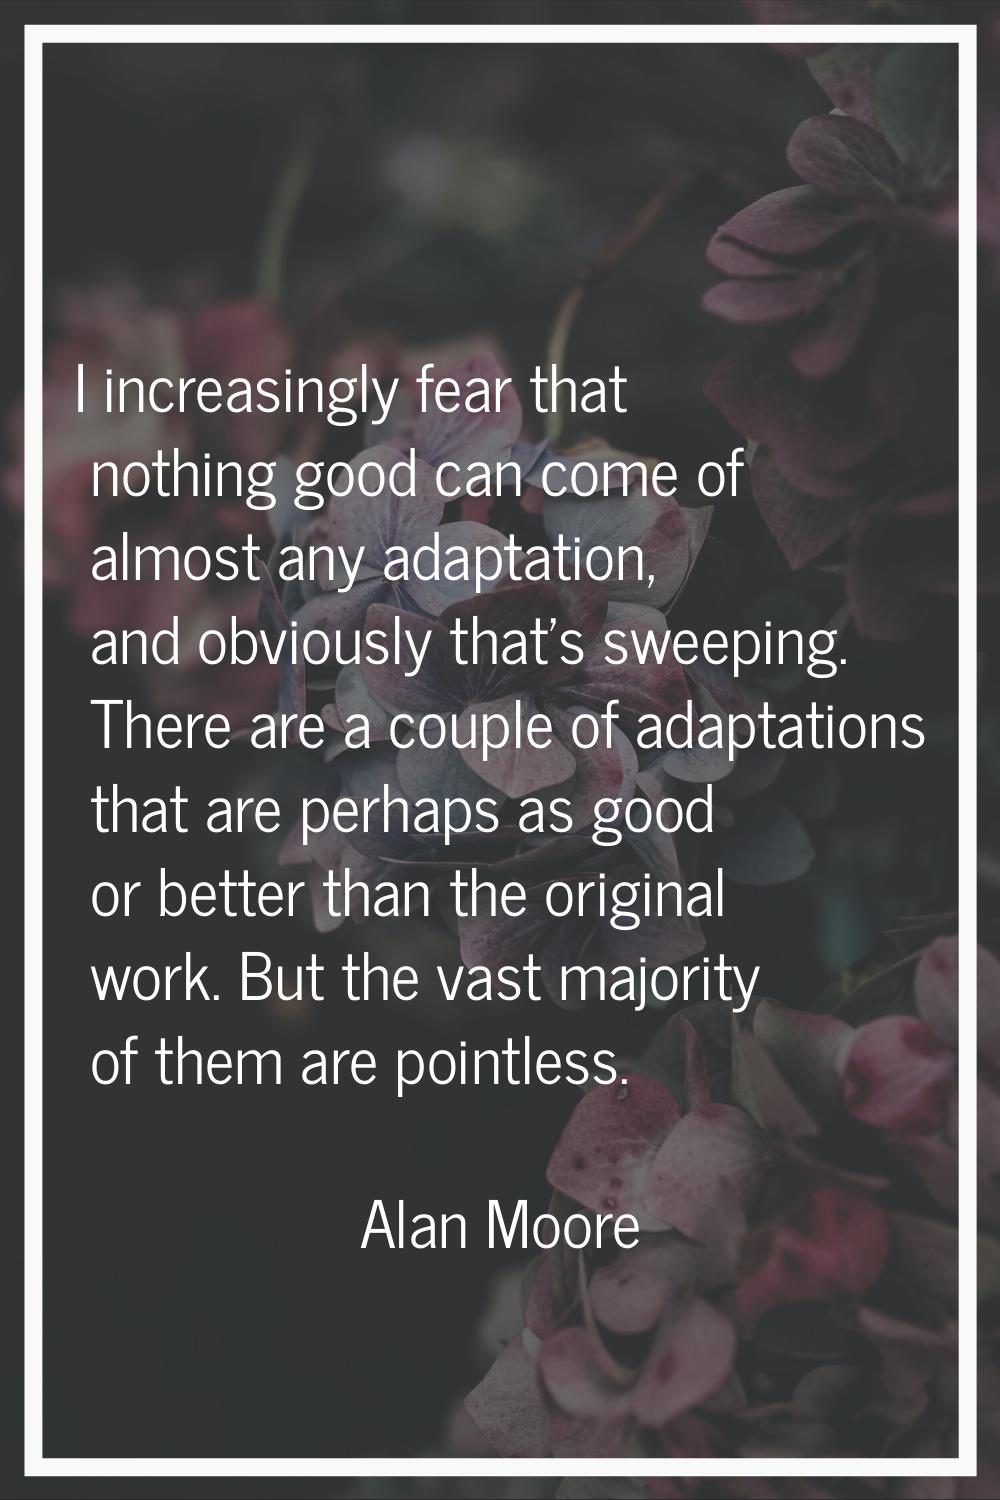 I increasingly fear that nothing good can come of almost any adaptation, and obviously that's sweep